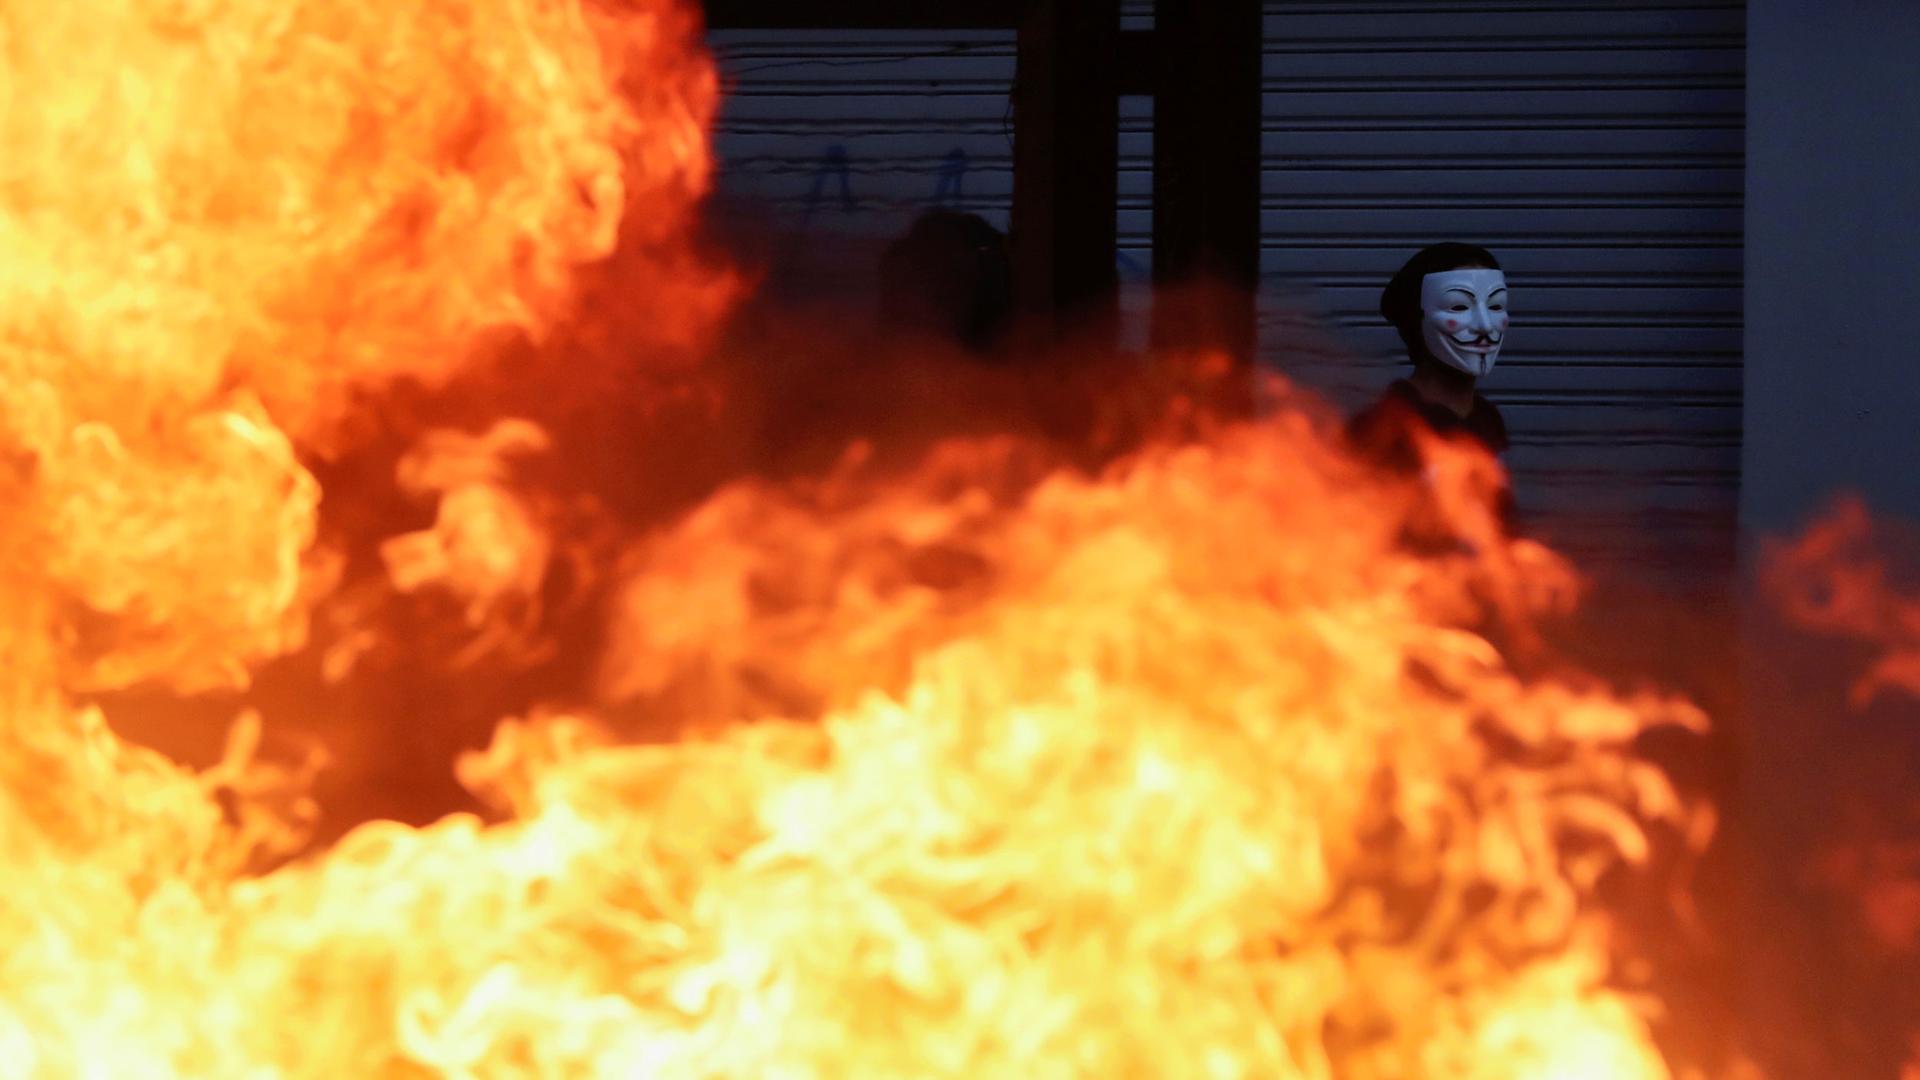 A demonstrator wearing a Guy Fawkes mask is shown walking past a large fire.